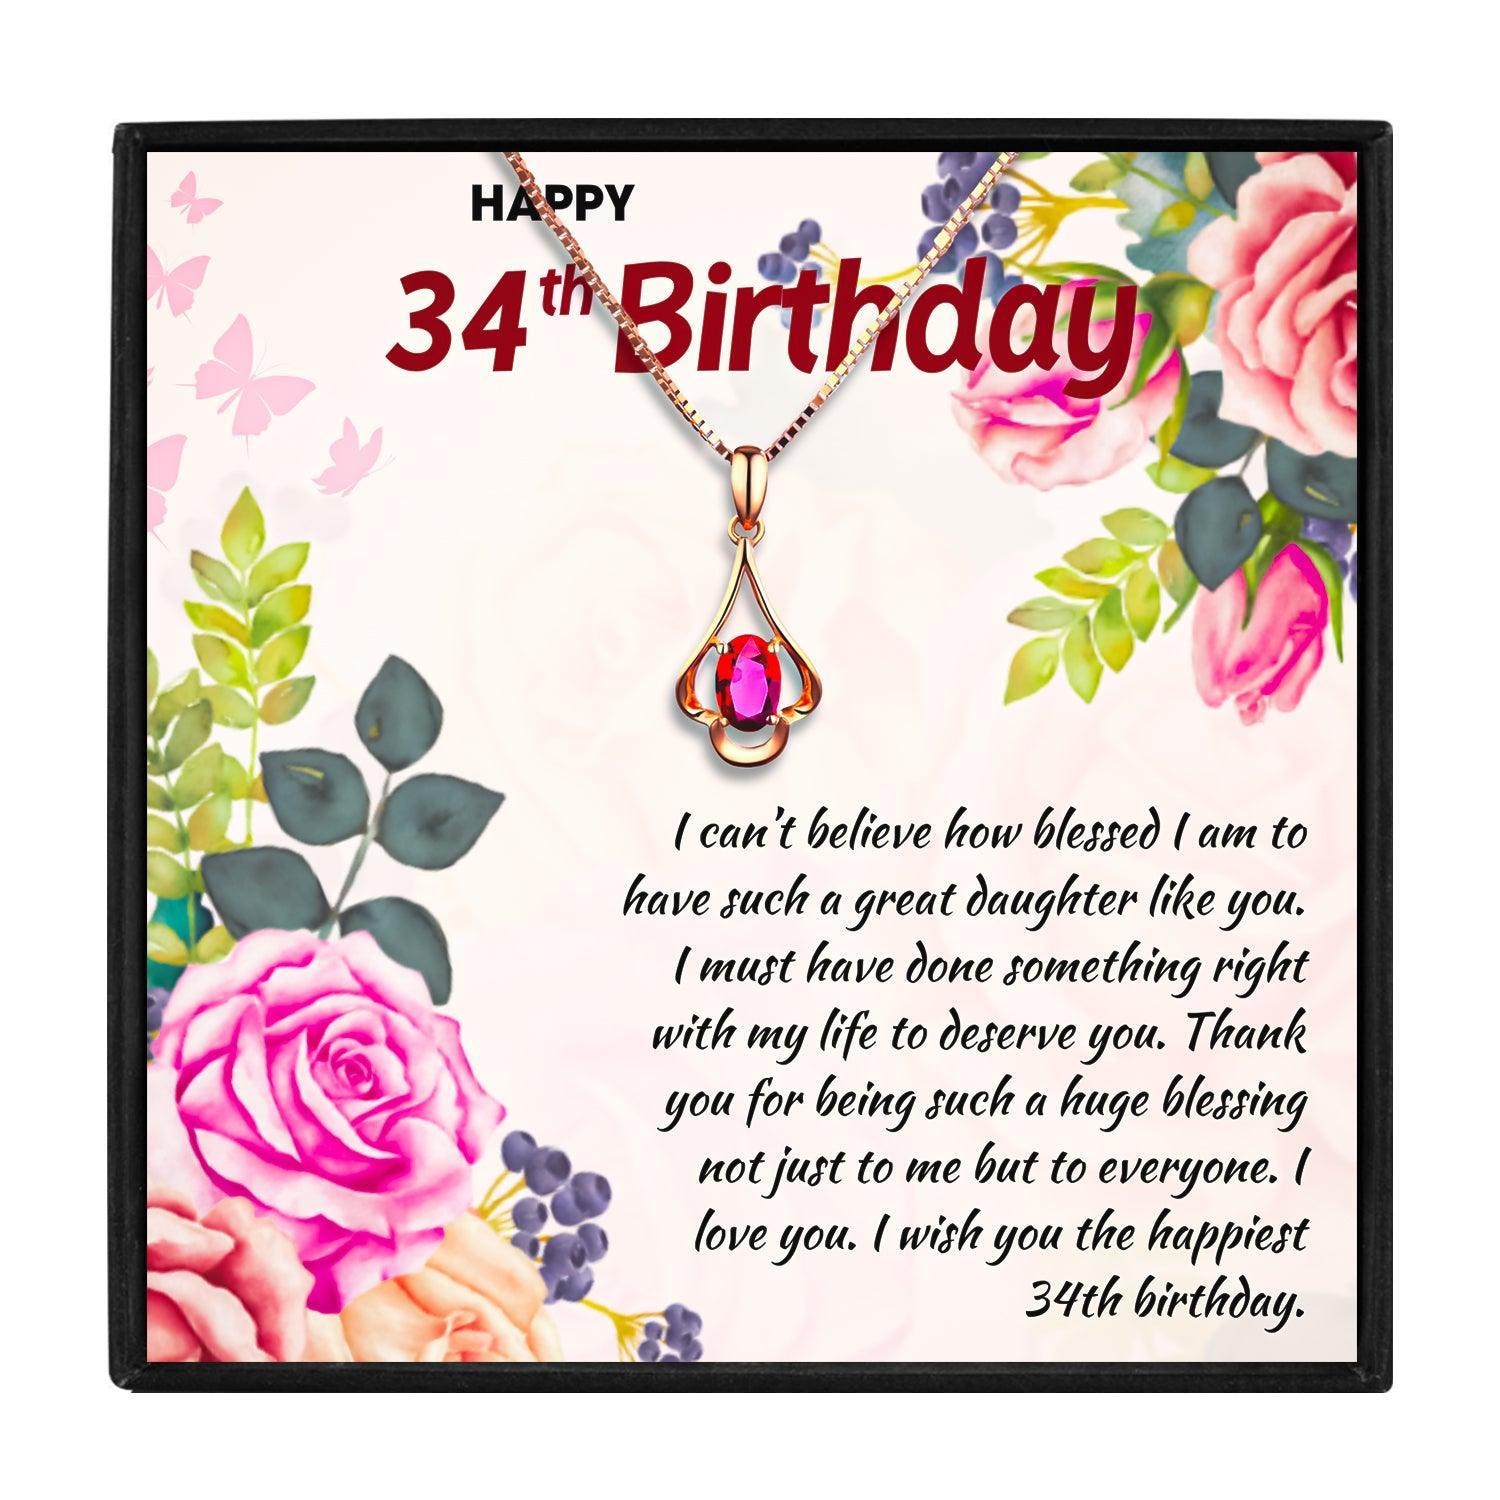 Gifts Ideas For 34 Year Old Birthday for Christmas 2023 | Gifts Ideas For 34 Year Old Birthday - undefined | 34 Birthday Ideas Gifts, 34th Birthday Gifts, 34th Birthday Gifts for Women | From Hunny Life | hunnylife.com